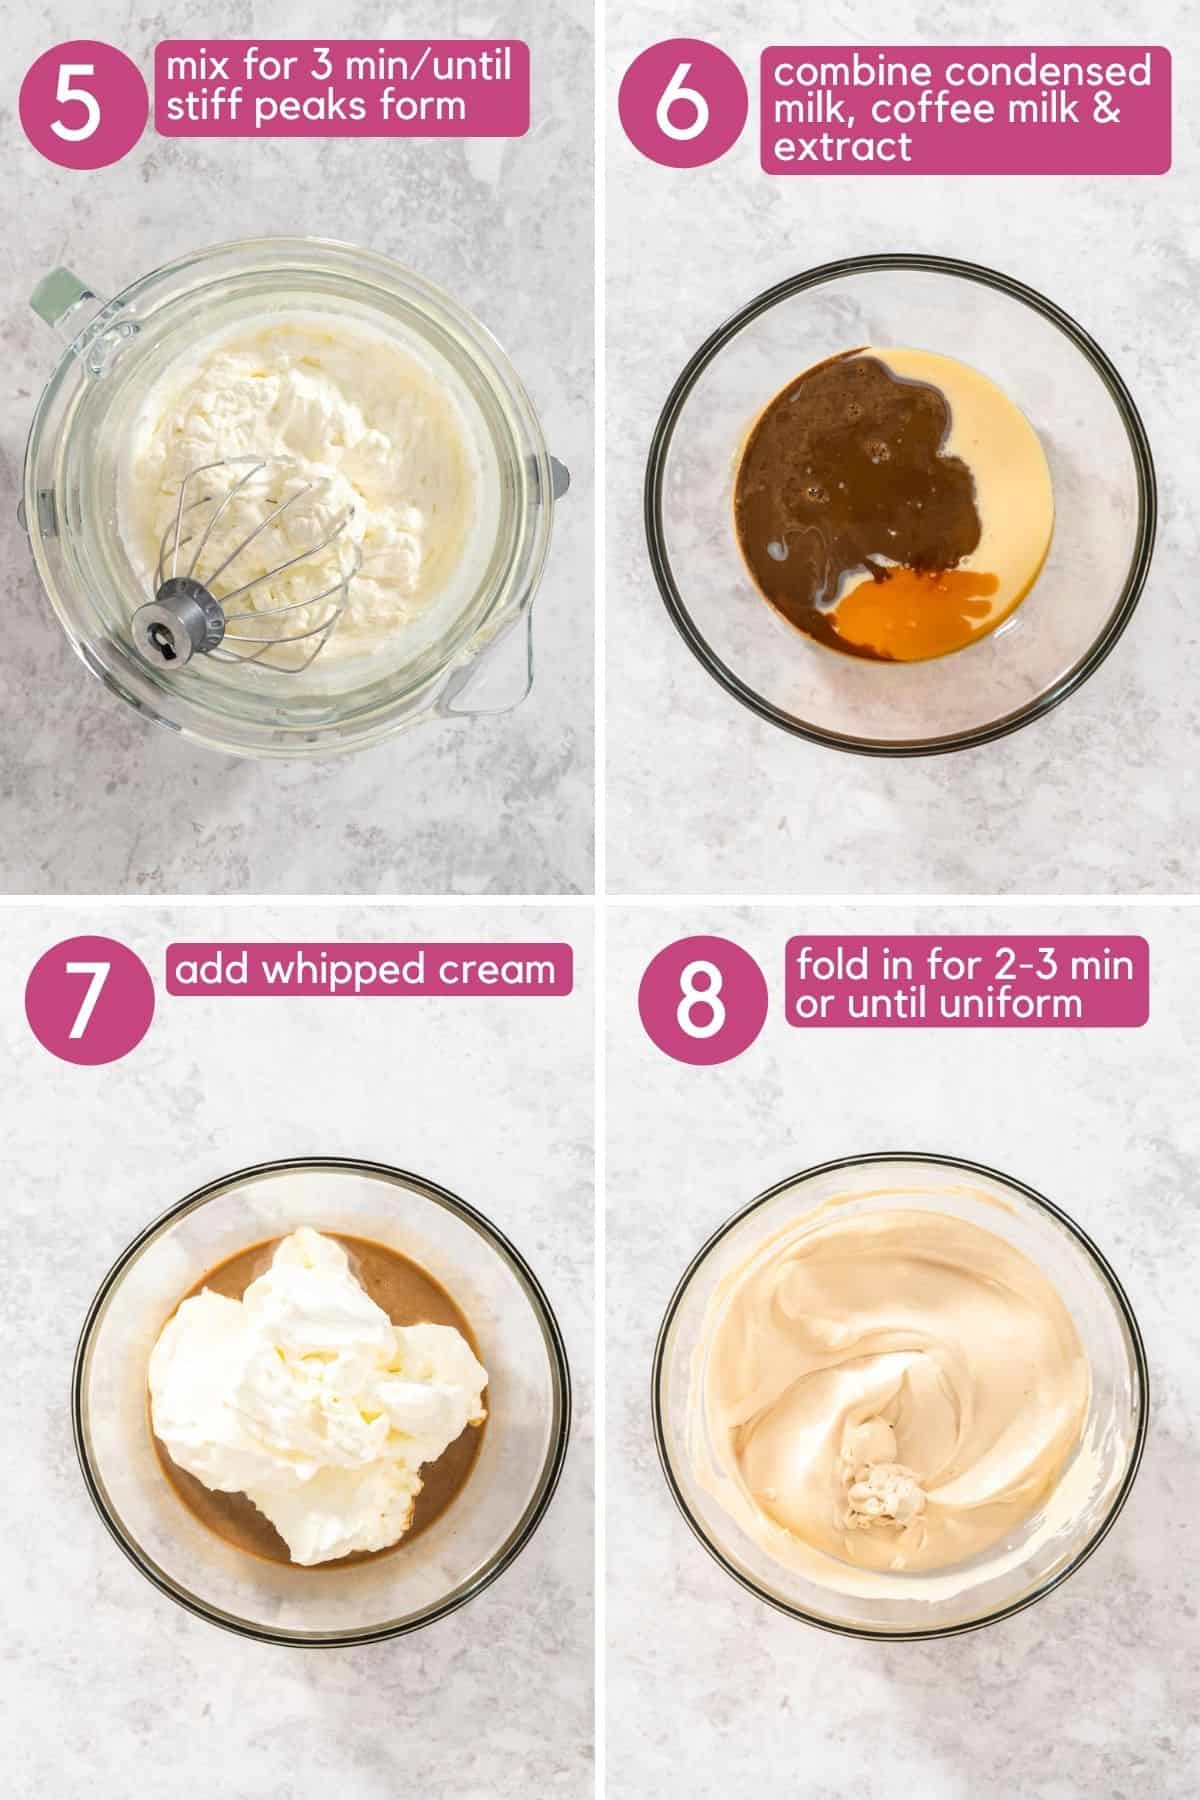 Combining a homemade ice cream base with whipped cream.